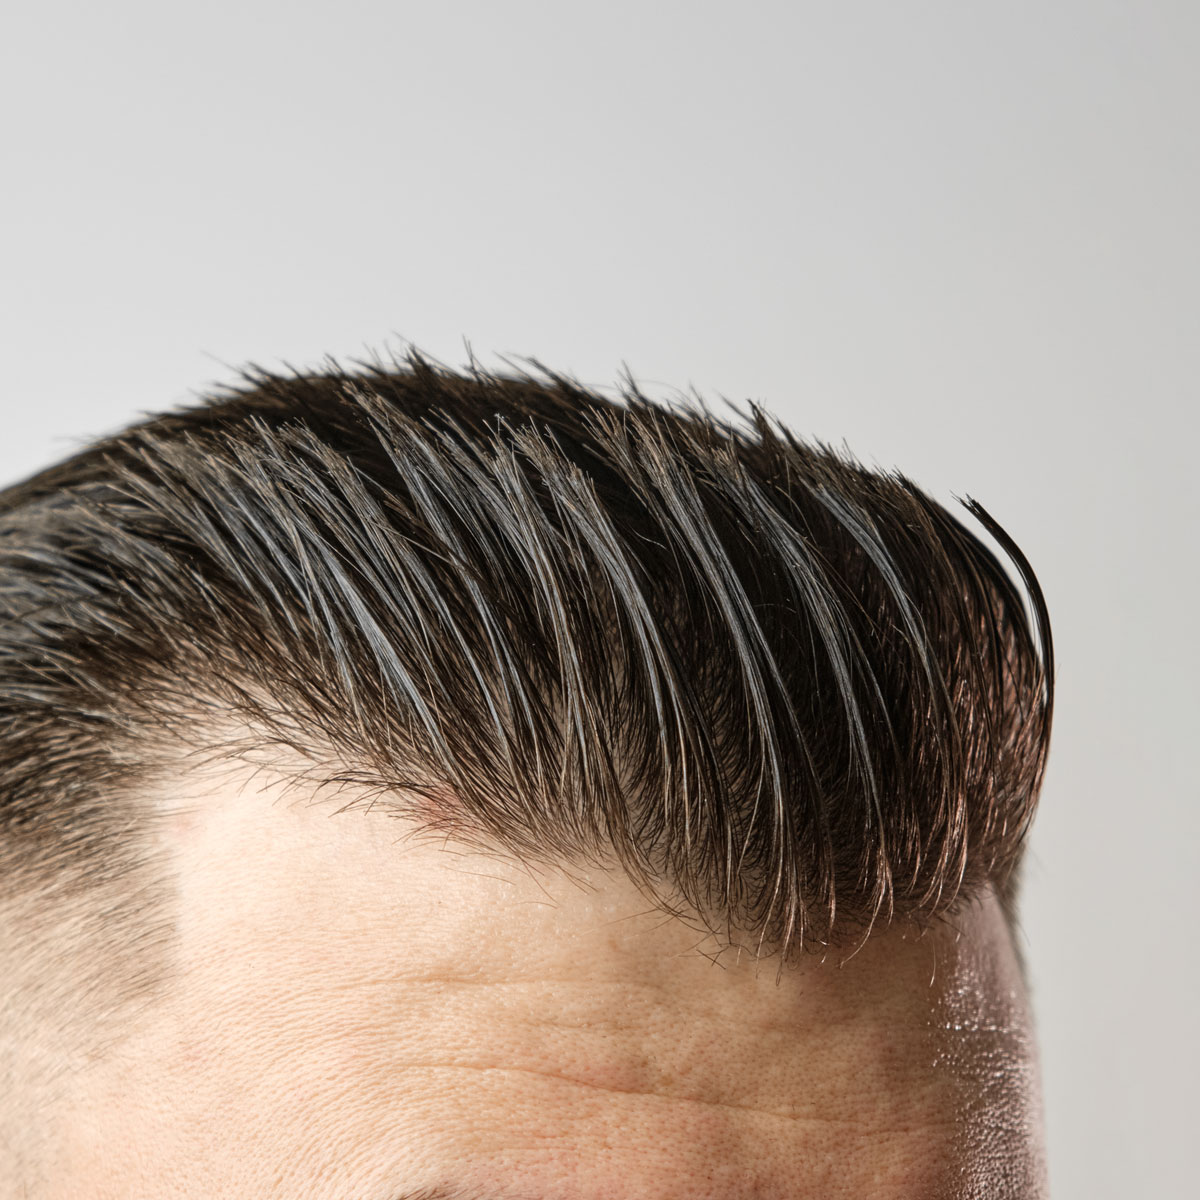 The Top 34 Hairstyles for Men | 2020 - The GentleManual